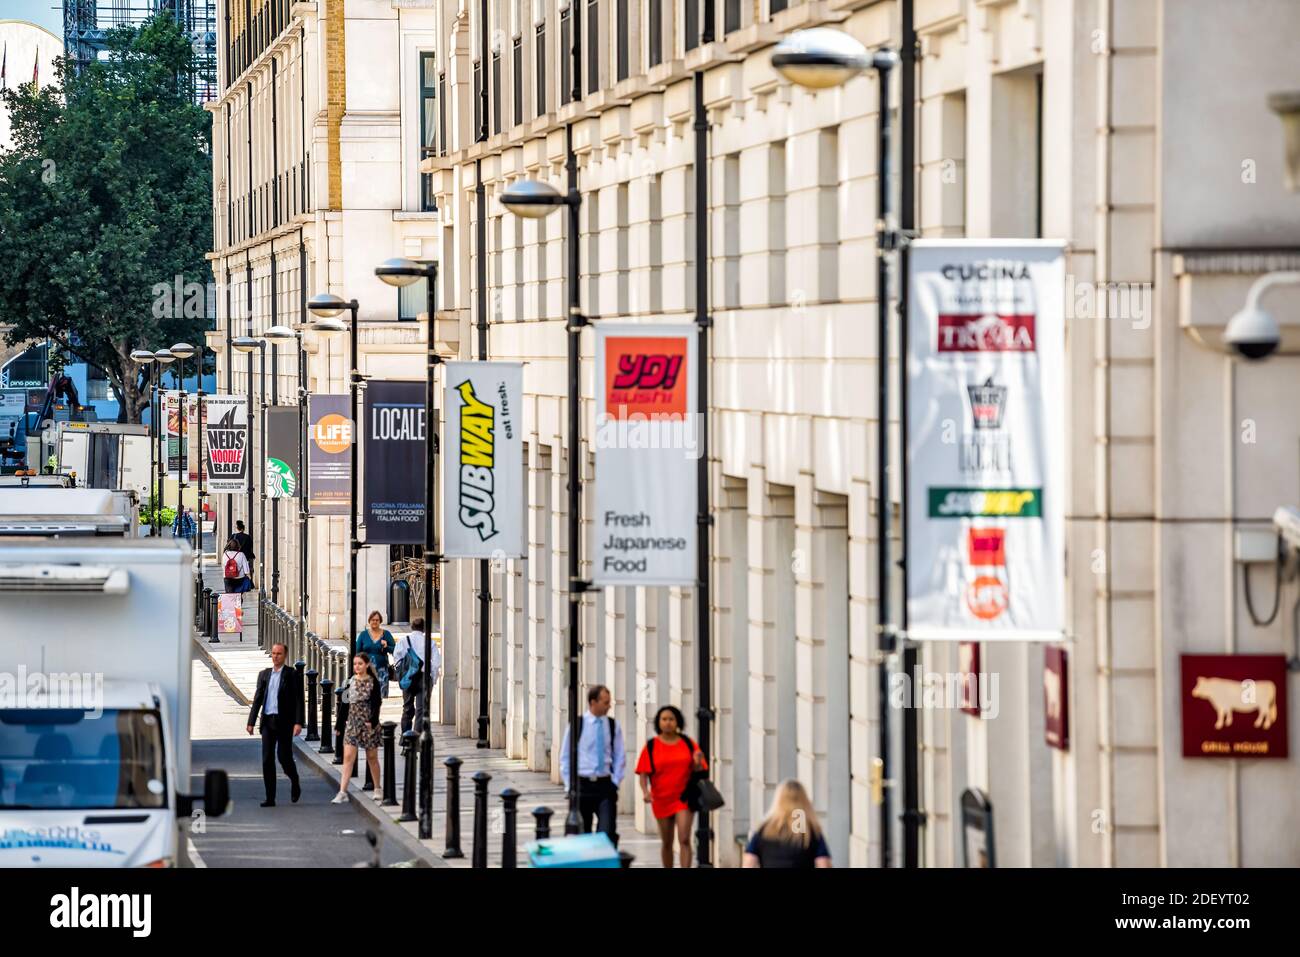 London, UK - June 22, 2018: Above high angle view on pedestrians people walking on street sidewalk and banners signs for restaurants such as Subway Stock Photo